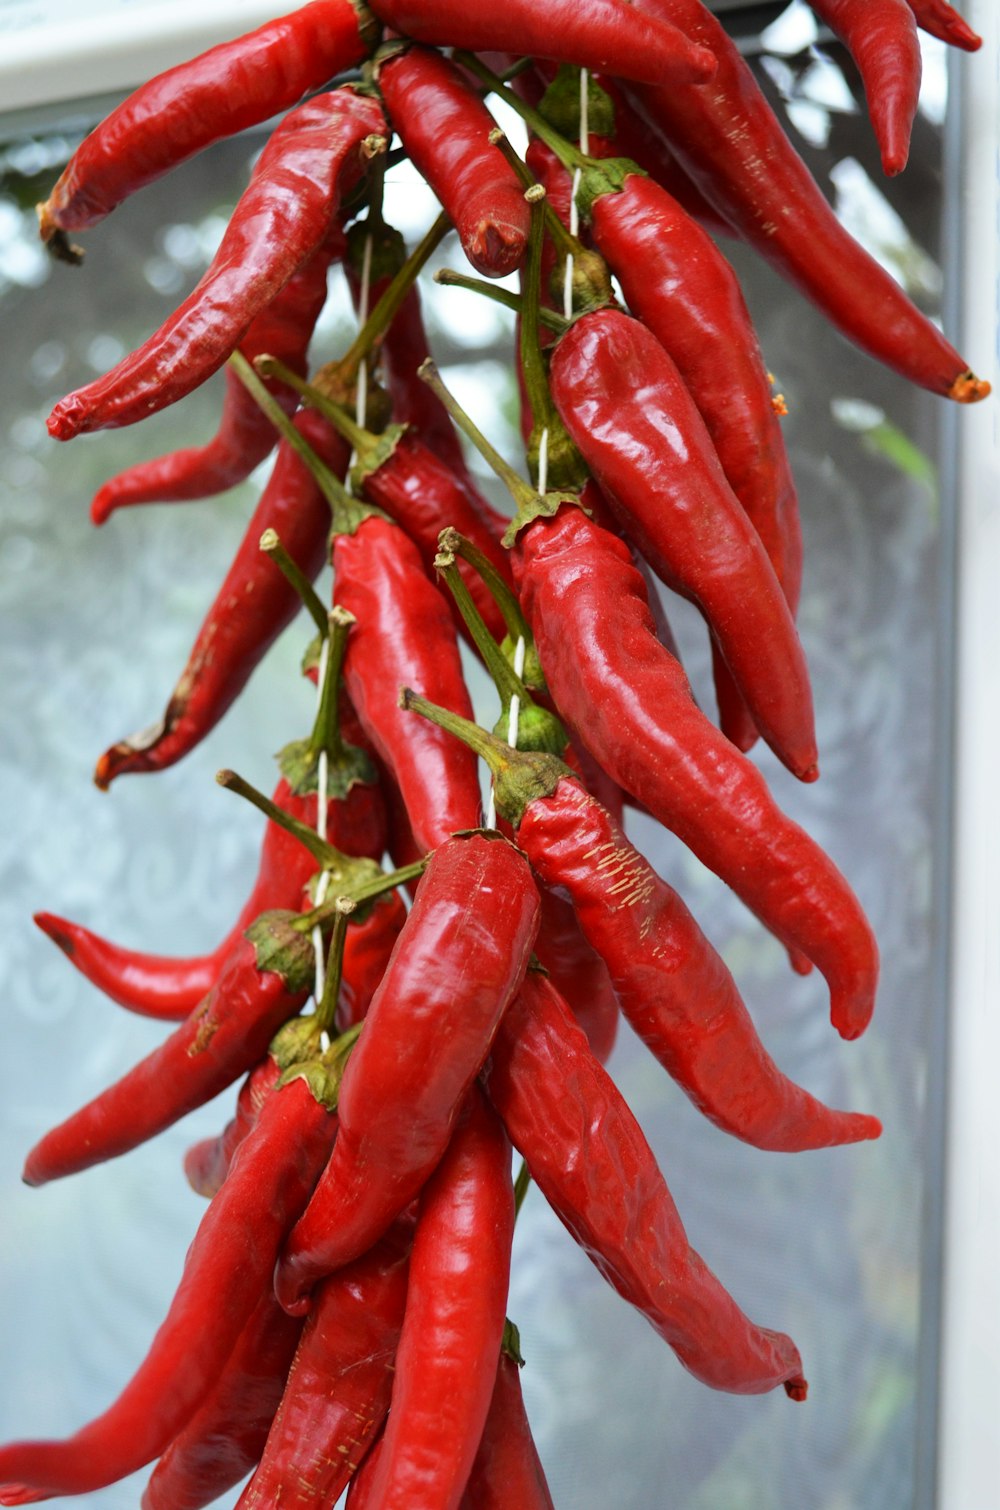 red chili peppers on white plastic container